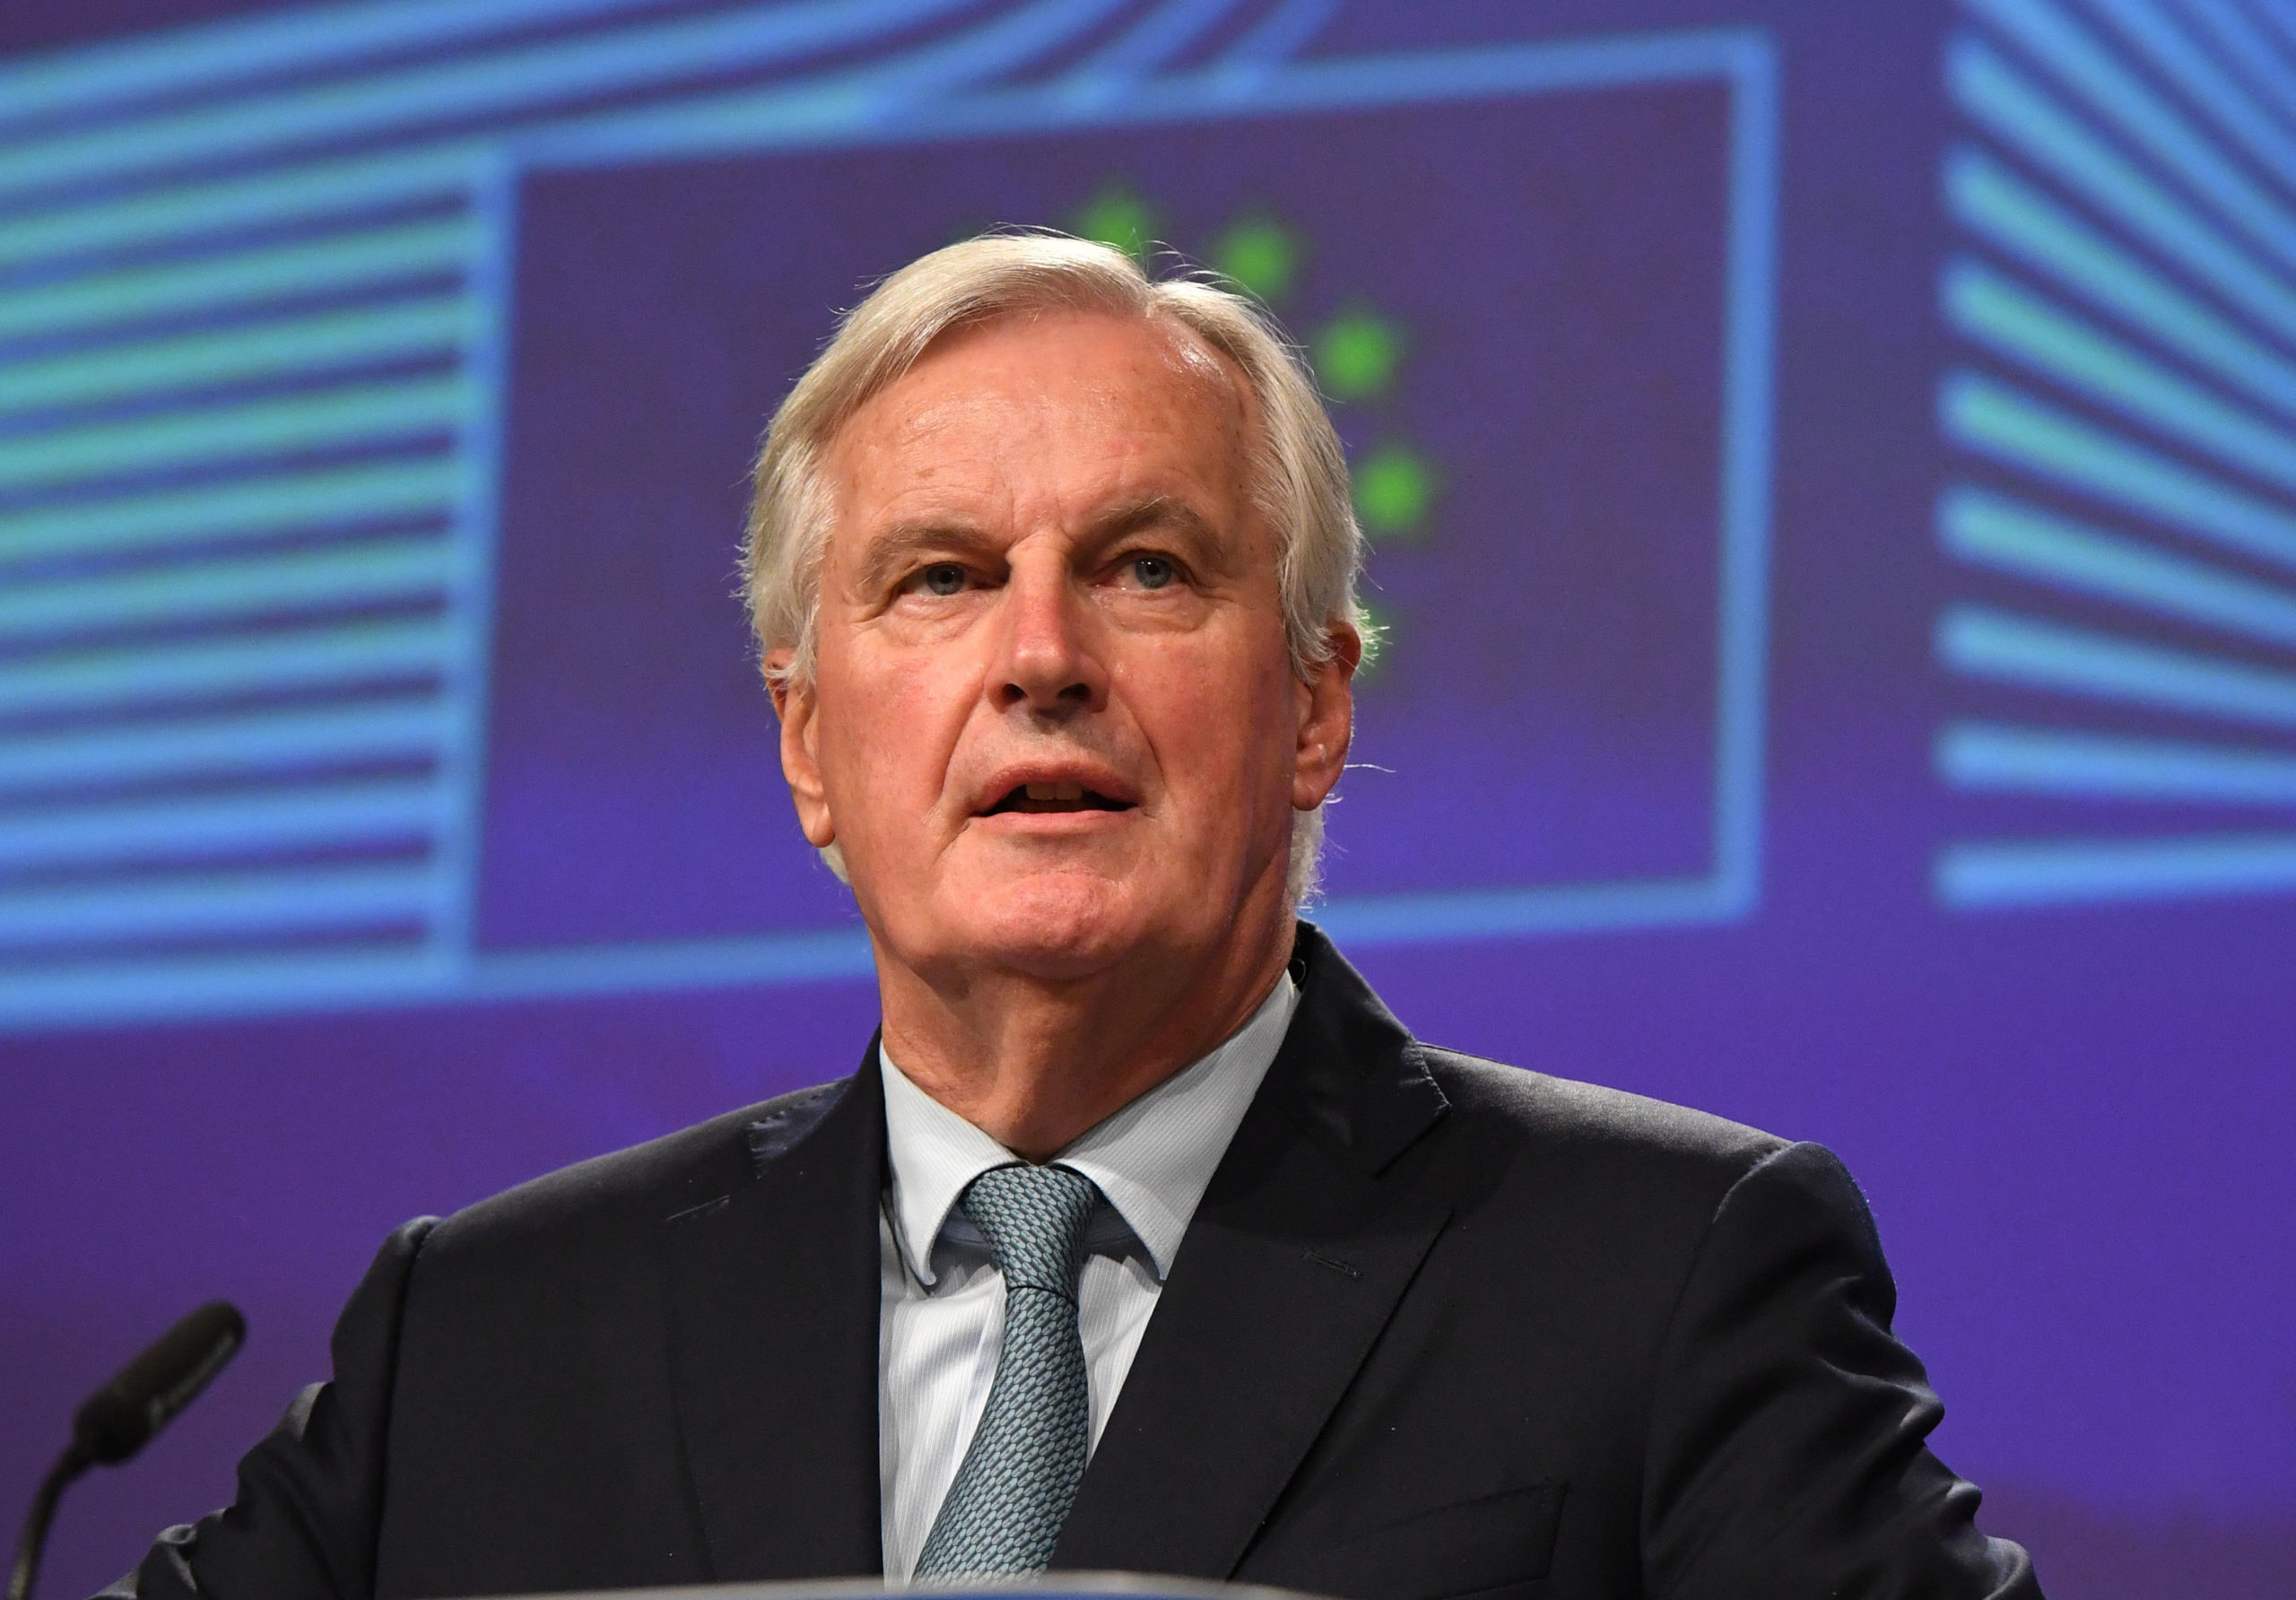 Michel Barnier criticised the UK for taking the talks backwards.